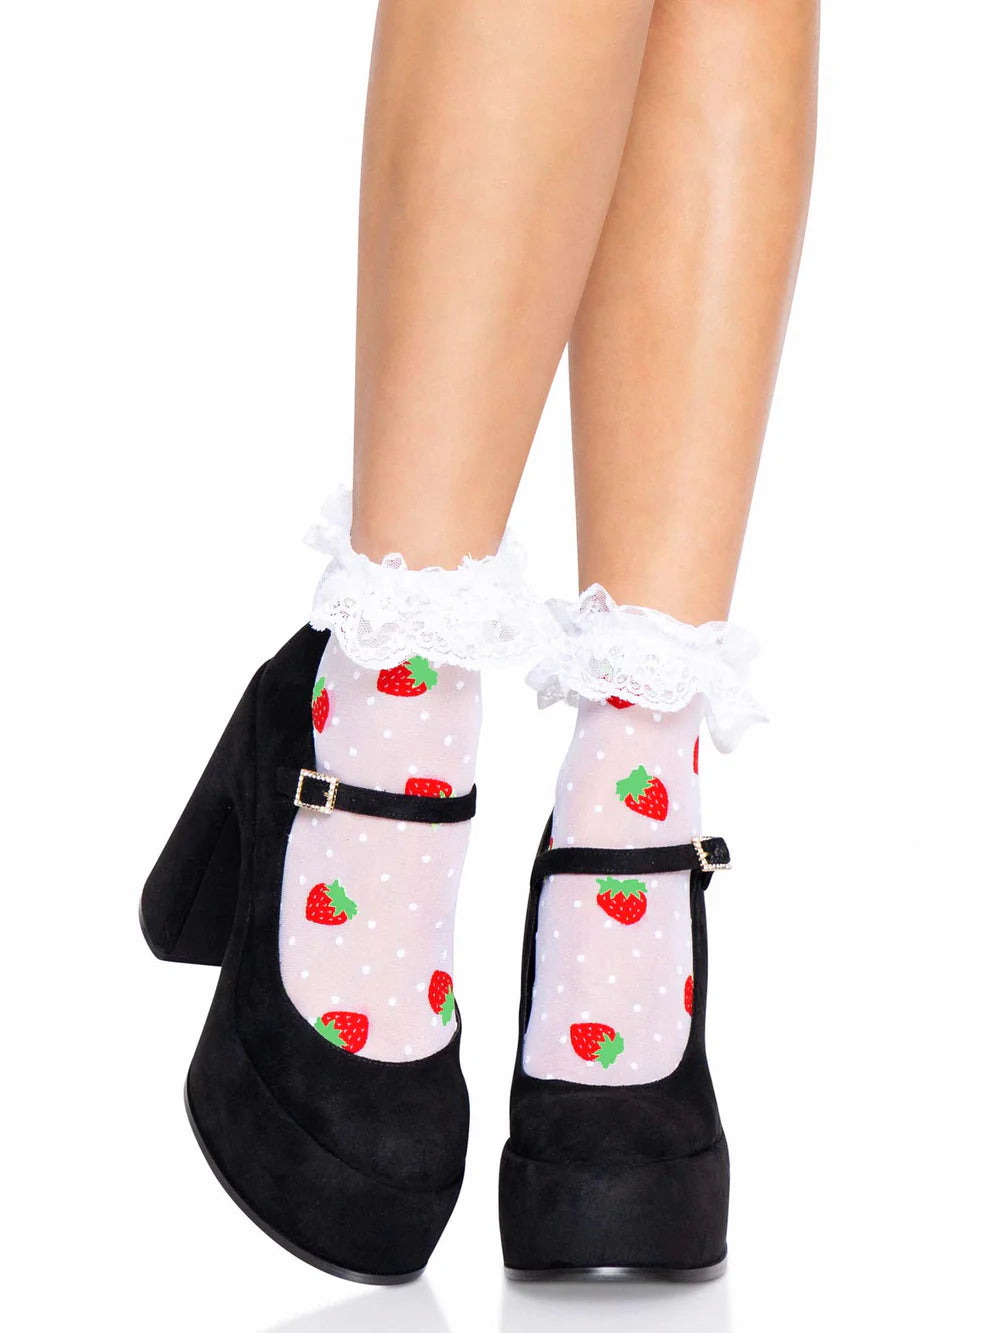 F*ck Off Ankle Tube Socks: Red, Blue, White - The Sugarpuss Collection